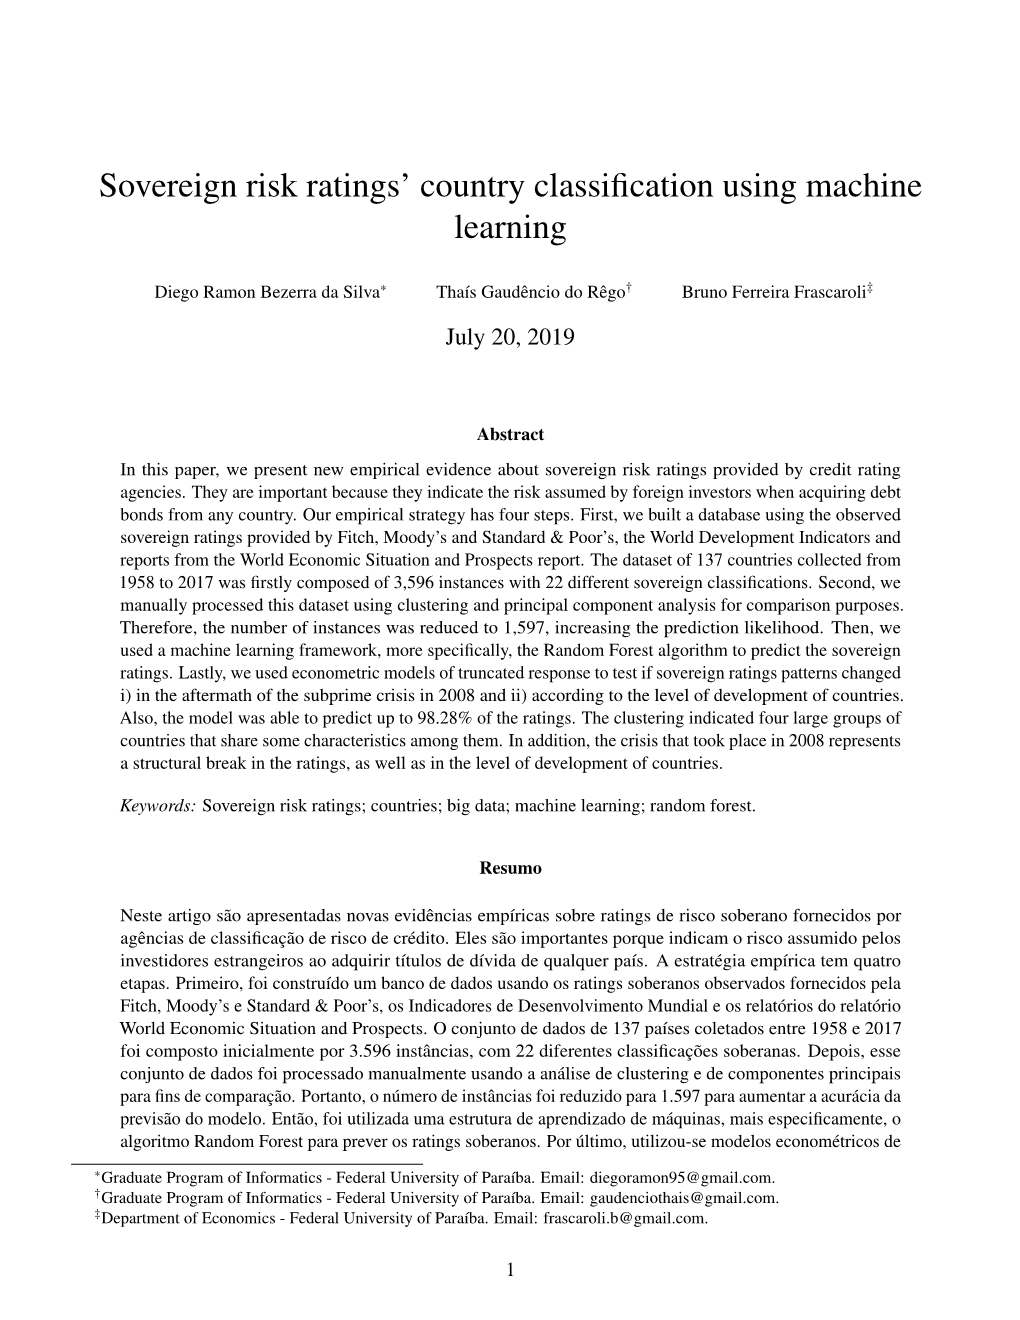 Sovereign Risk Ratings' Country Classification Using Machine Learning